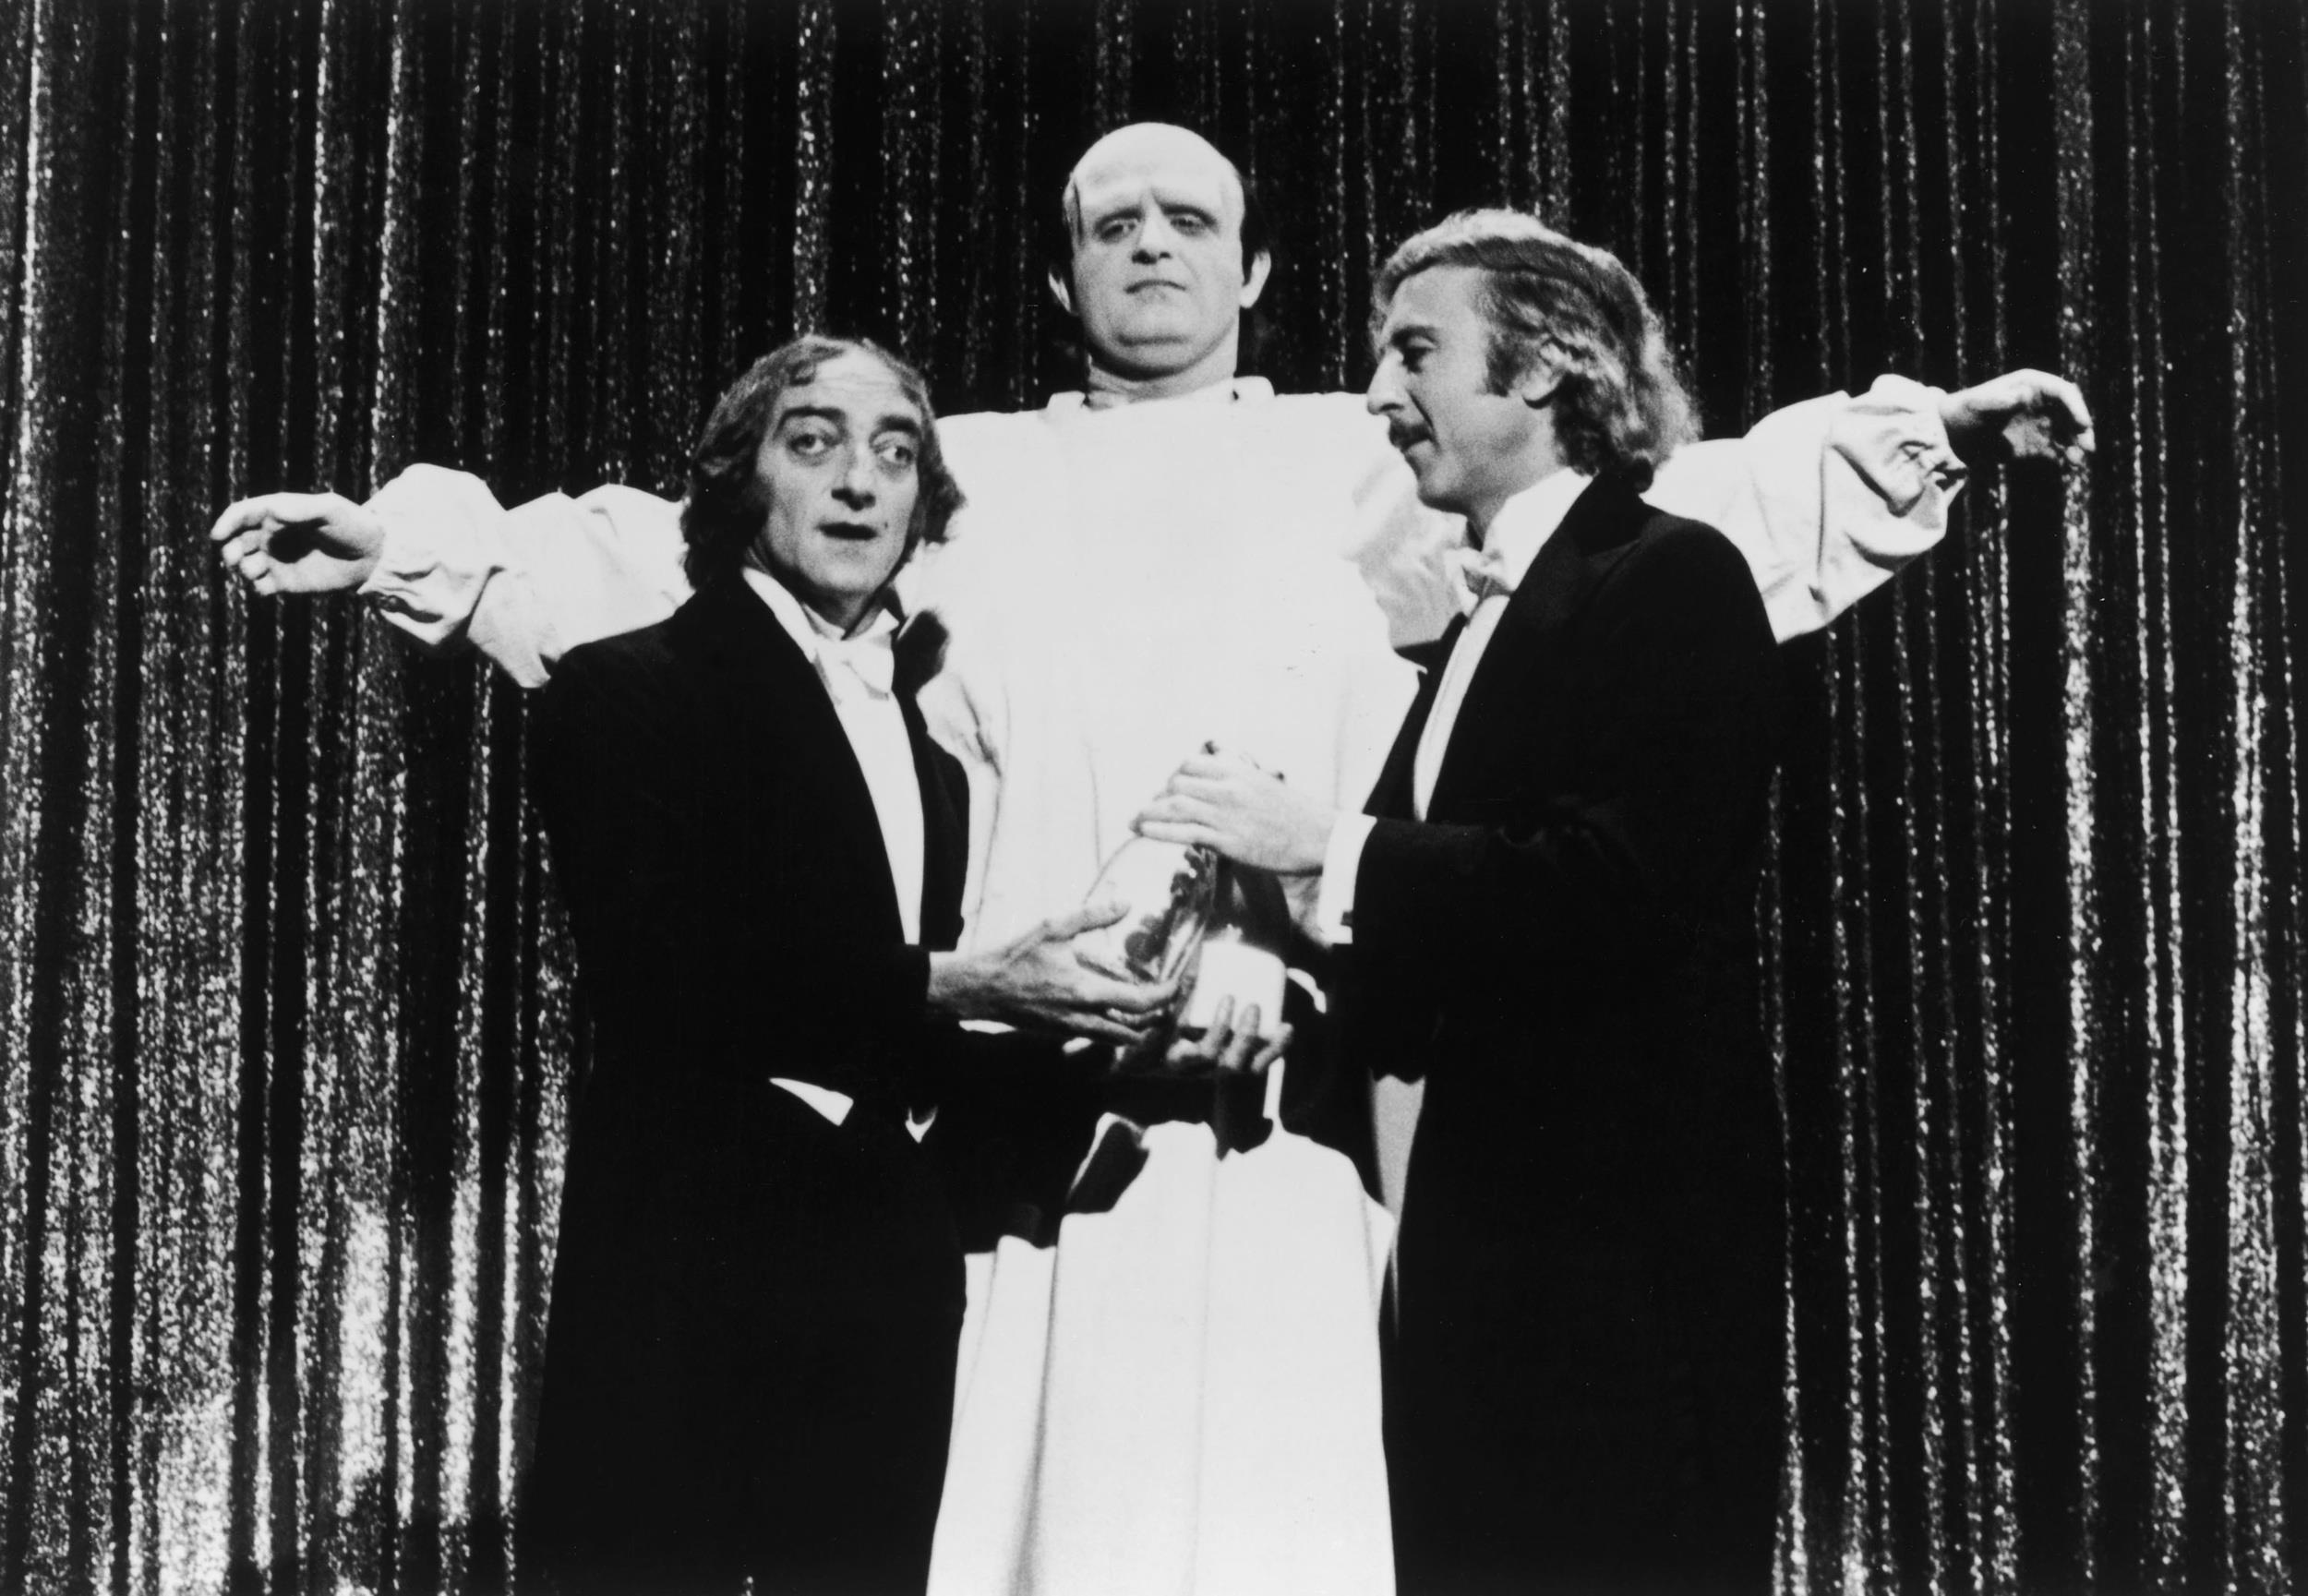 <p>Feldman gives one of several winning comedic performances in<em> Young Frankenstein</em>, and while some of it was in the script, he did bring one bit of comedy to the proceedings. It was the actor’s idea to move Igor’s hump around on his back, adding another sight gag to the movie.</p><p><a href='https://www.msn.com/en-us/community/channel/vid-cj9pqbr0vn9in2b6ddcd8sfgpfq6x6utp44fssrv6mc2gtybw0us'>Follow us on MSN to see more of our exclusive entertainment content.</a></p>